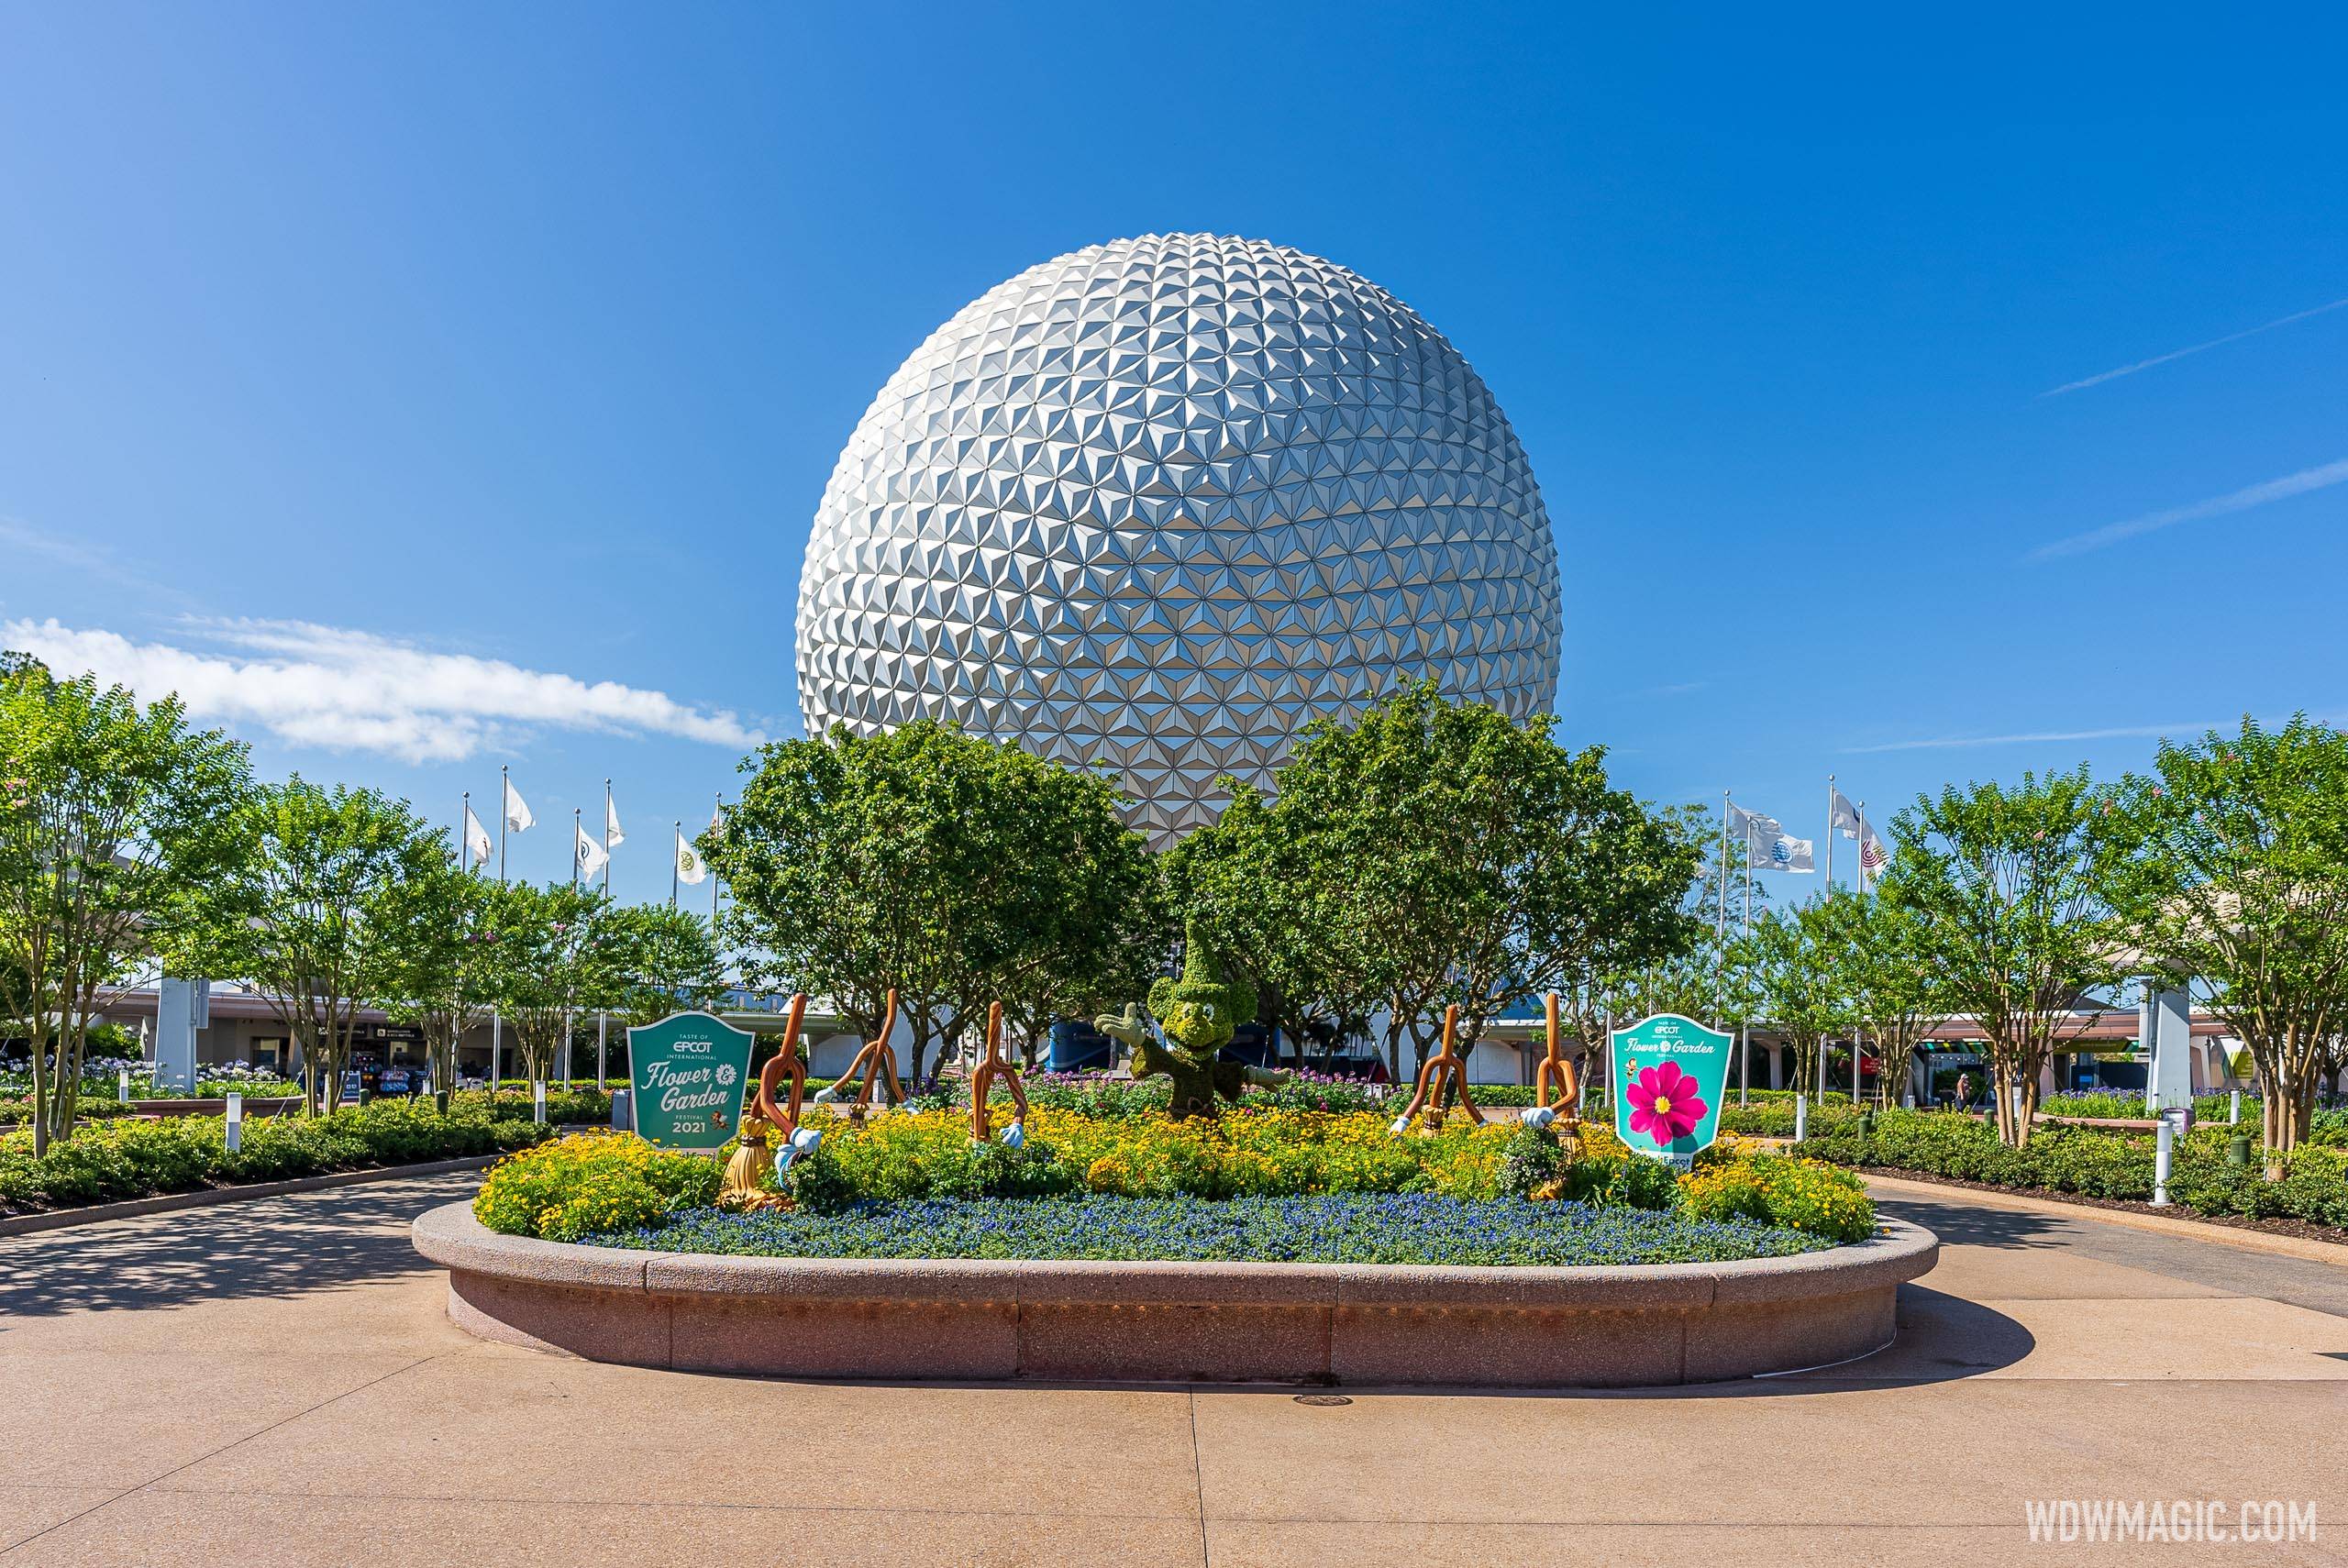 'Wheel of Fortune' shot at Epcot to air this week